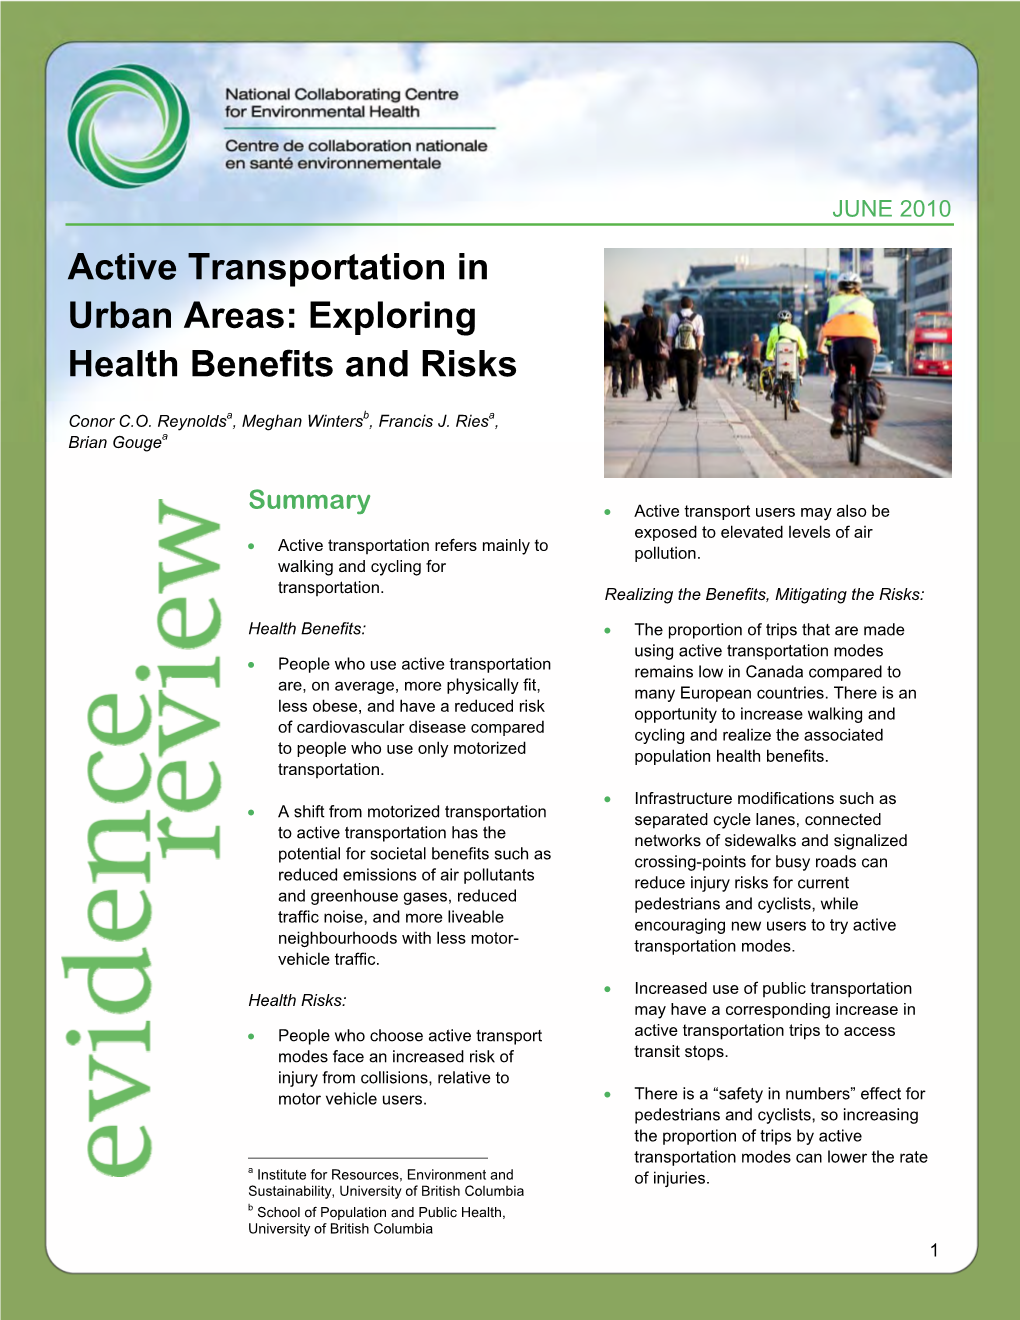 Active Transportation in Urban Areas: Exploring Health Benefits and Risks